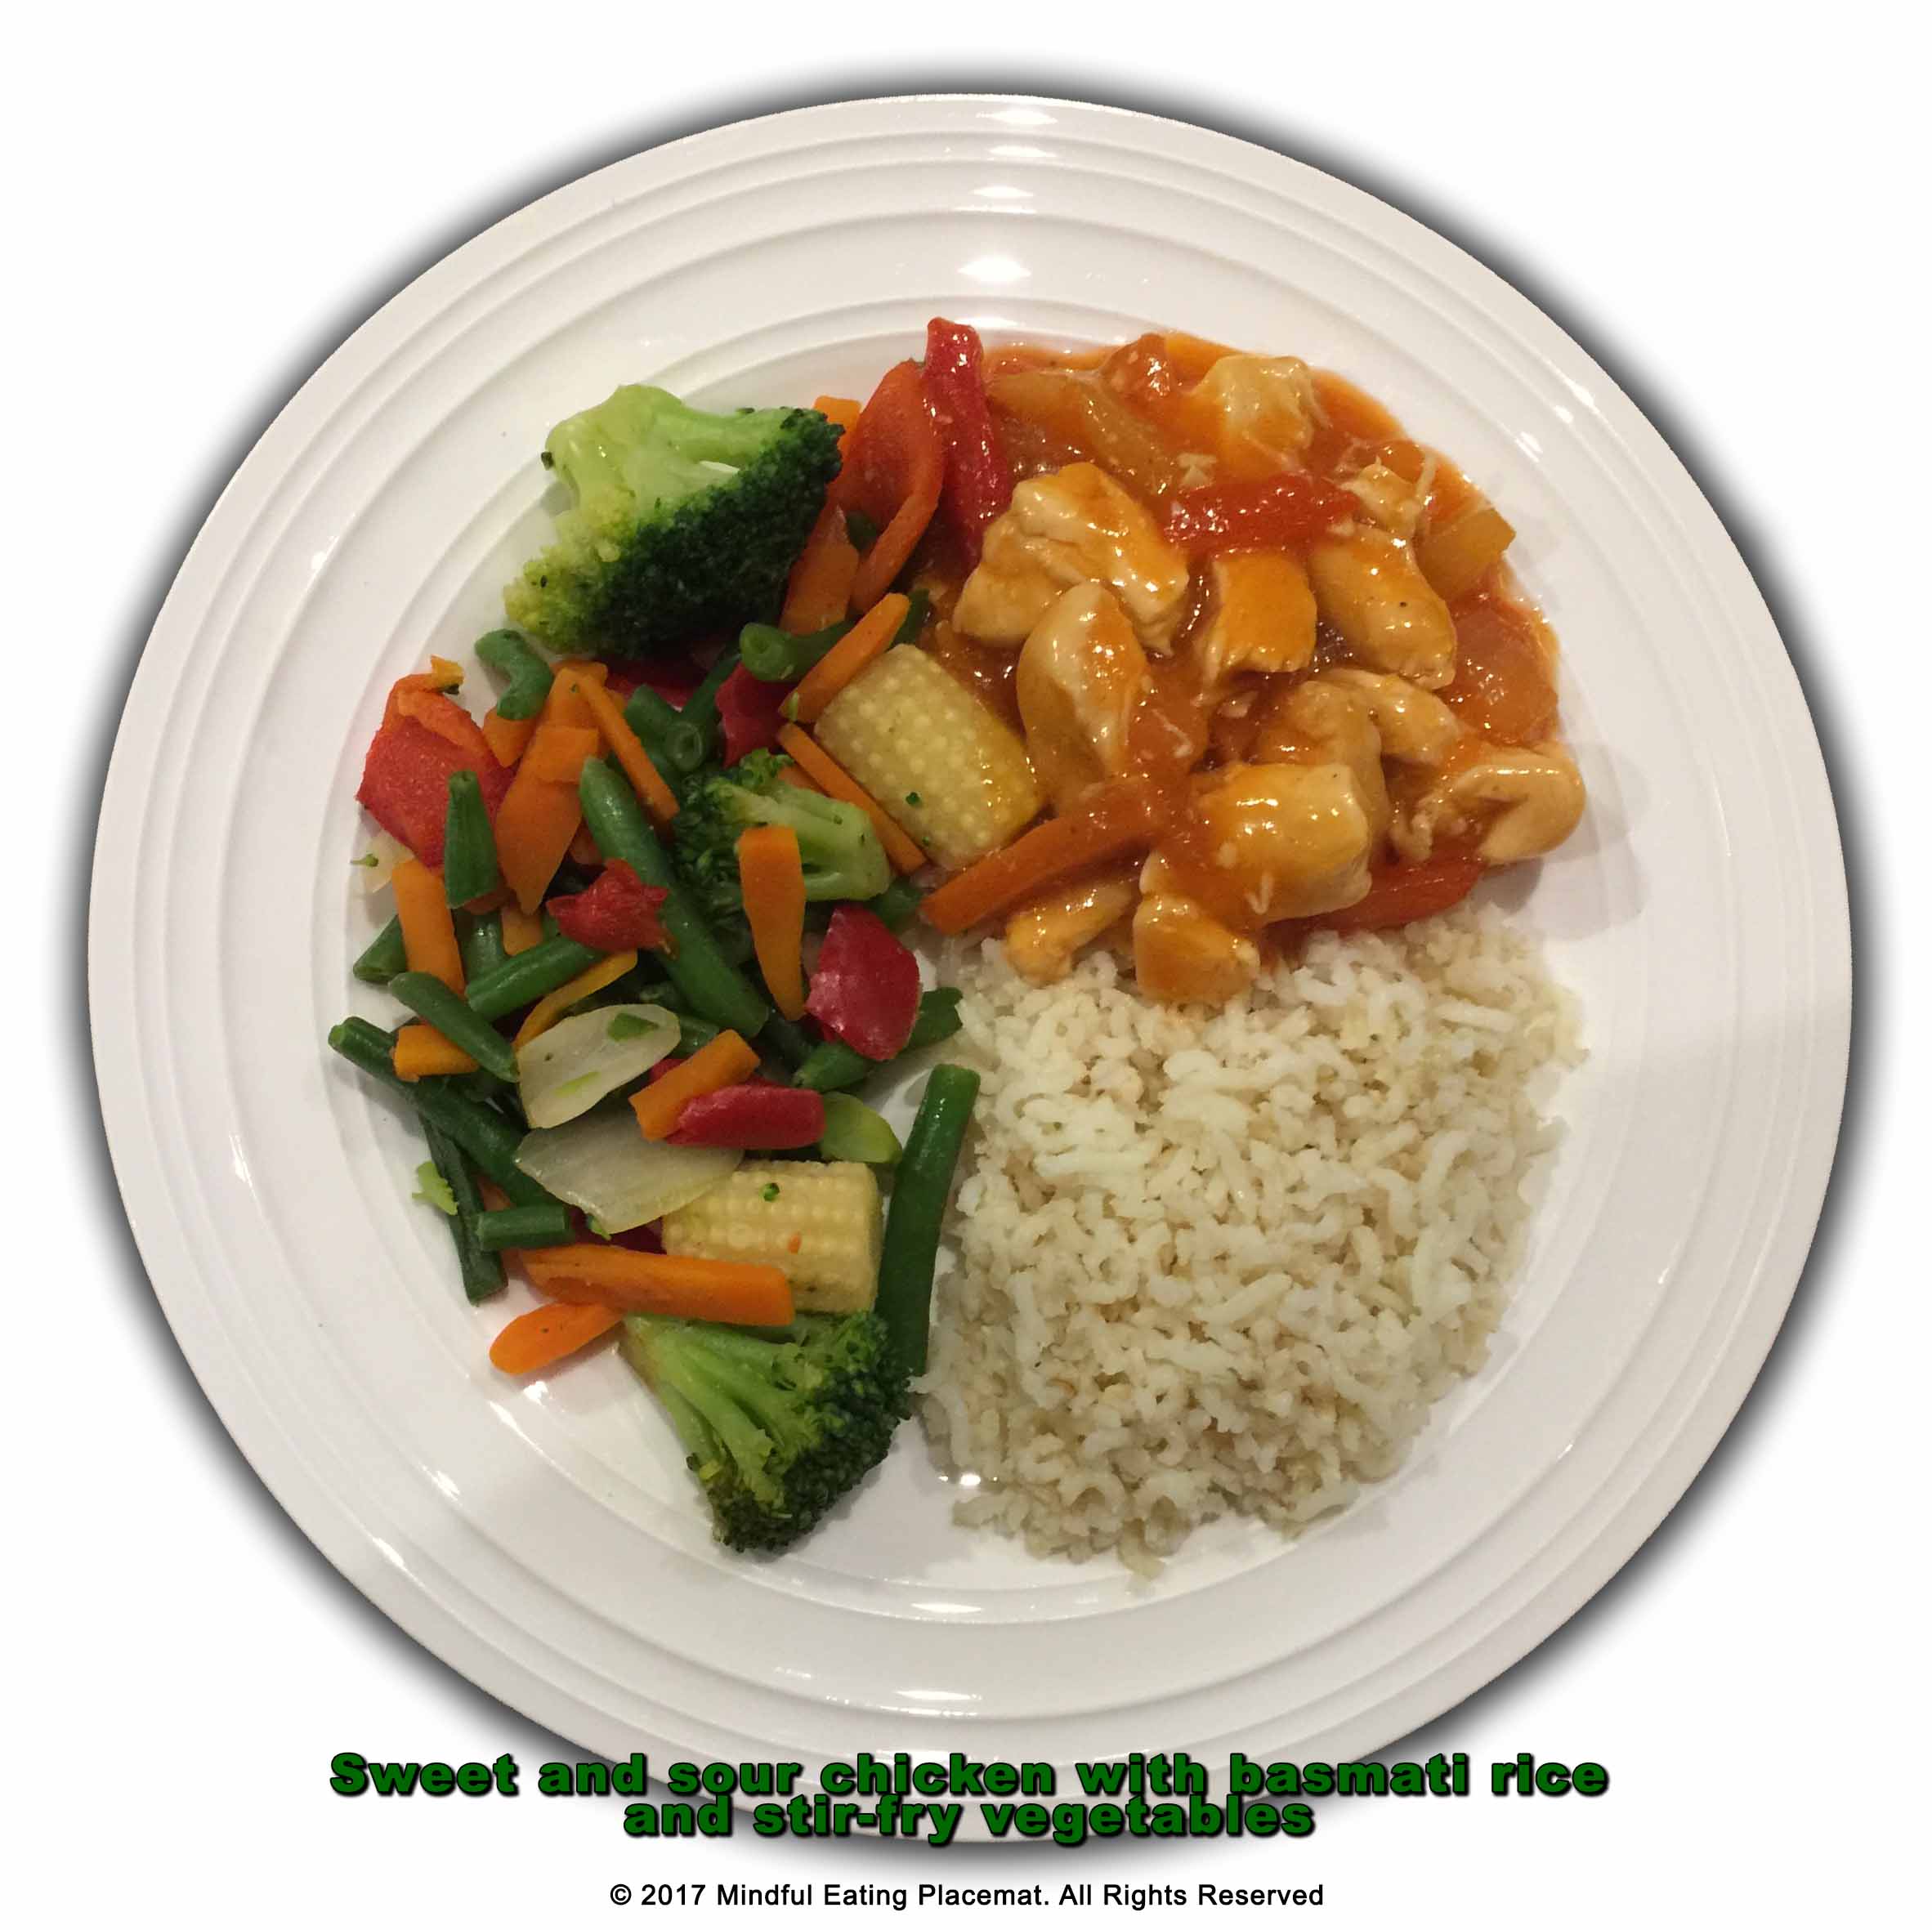 Sweet and sour chicken with basmati rice and stir-fry vegetables